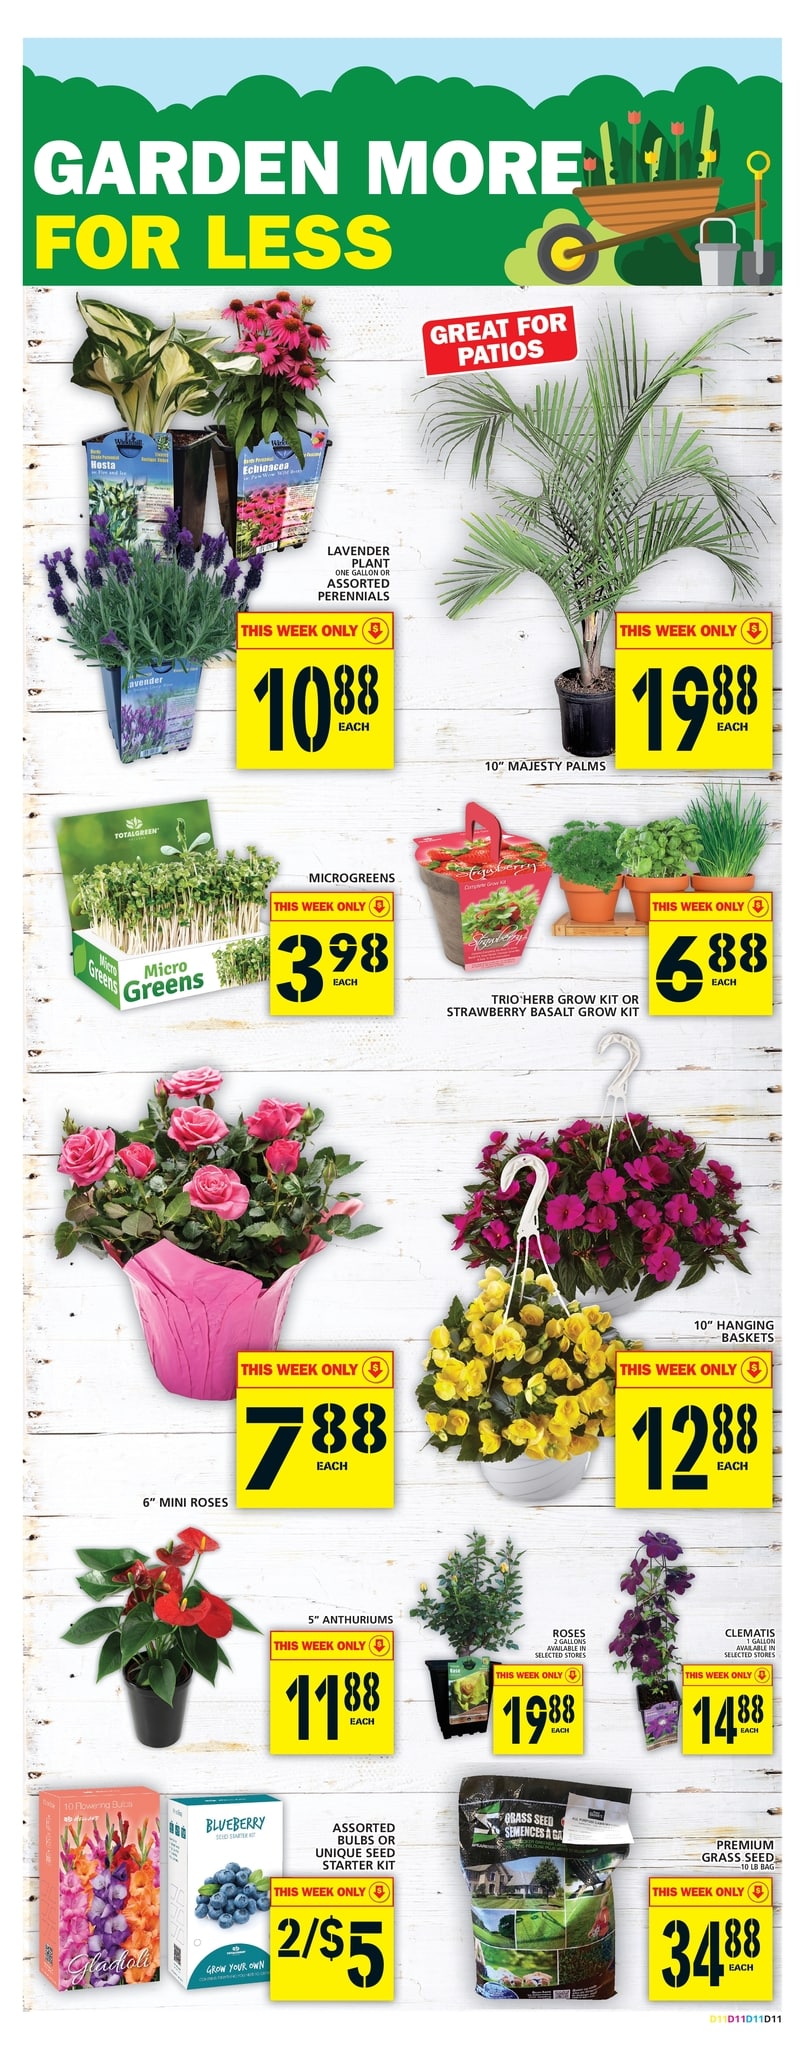 Food Basics - Weekly Flyer Specials - Page 14